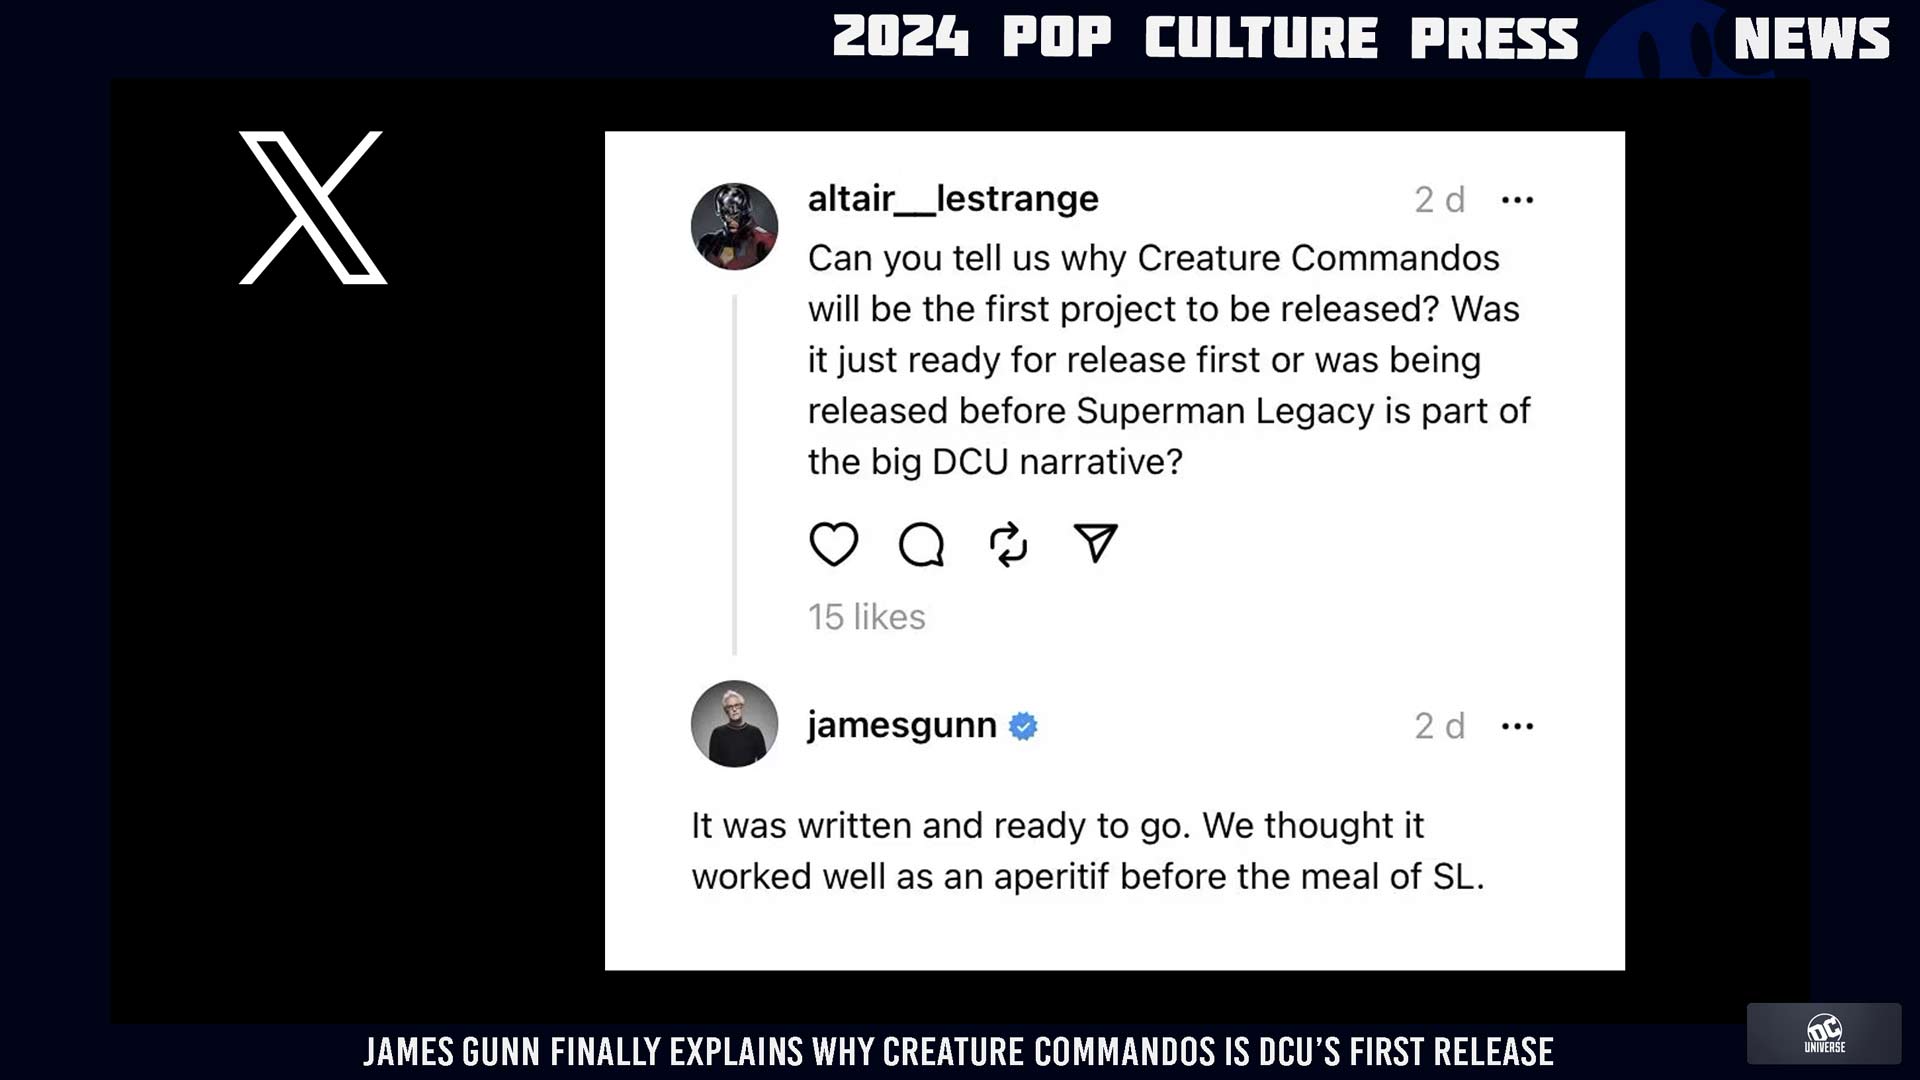 JAMES GUNN RESPONDS TO FAN QUESTION ON X ABOUT CREATURE COMMANDOS